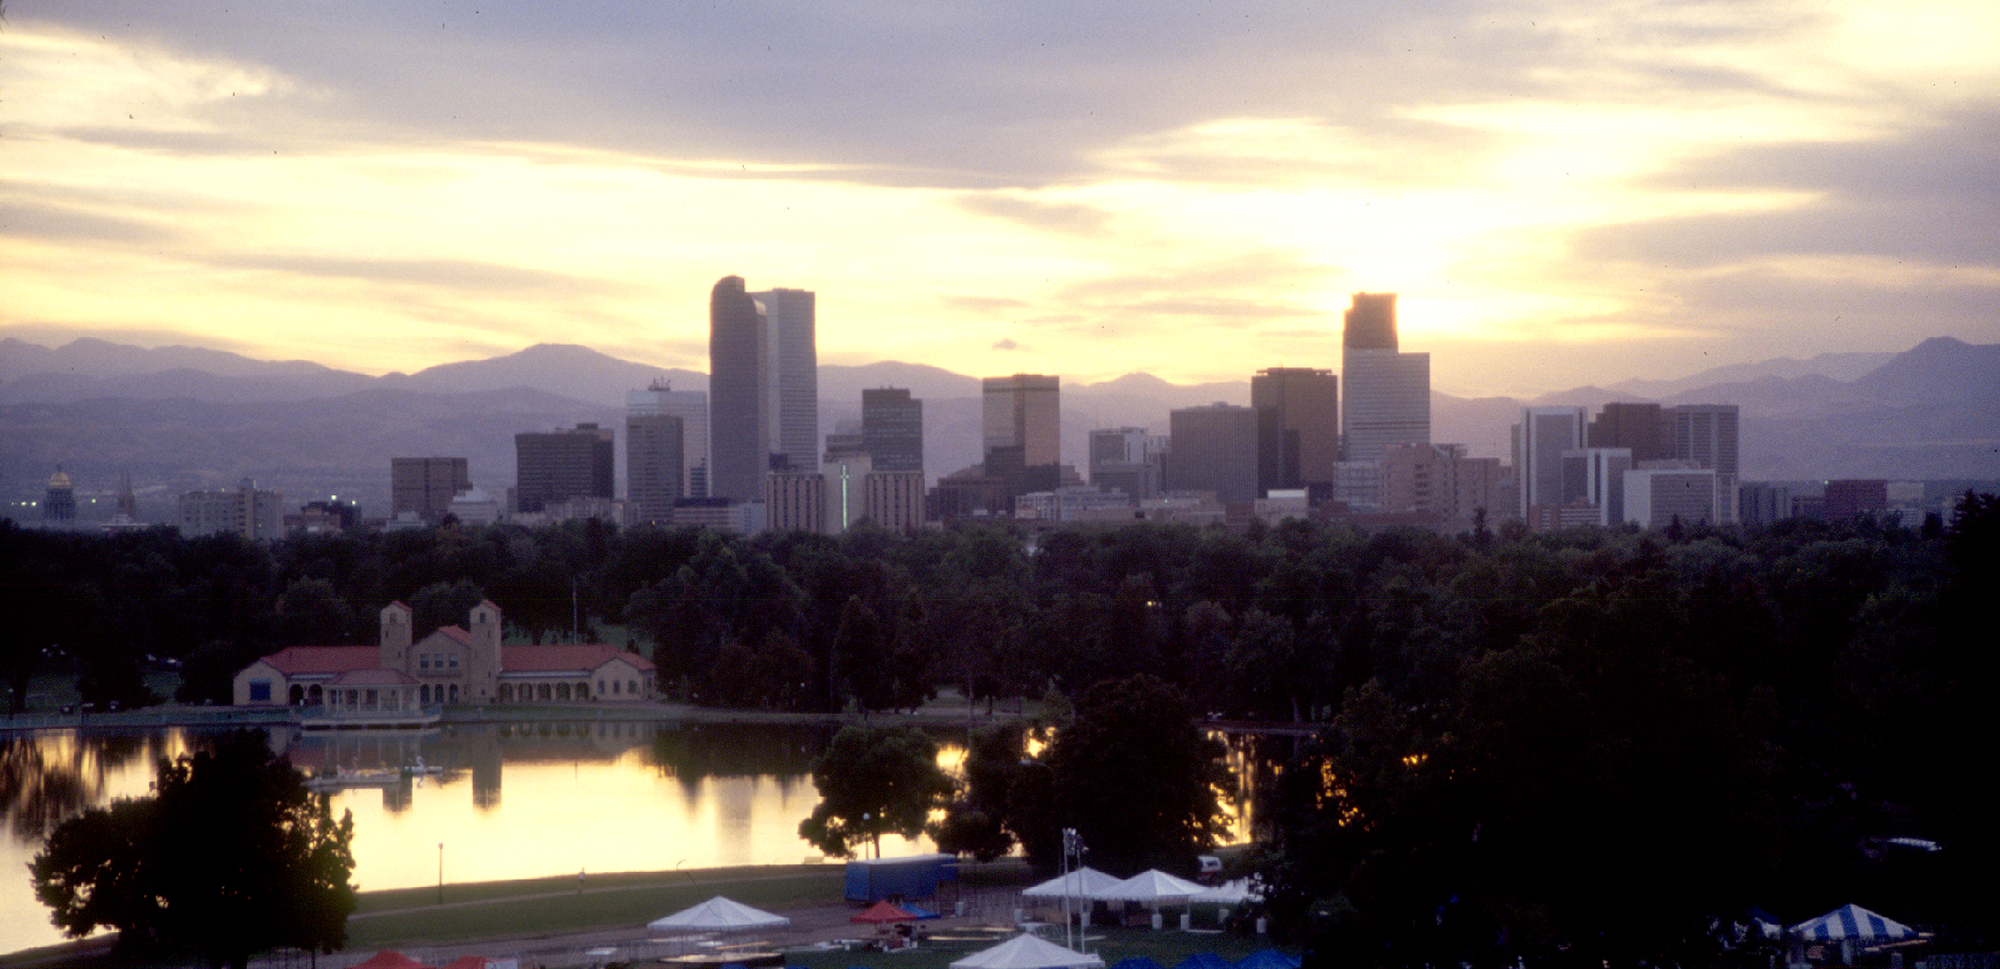 Downtown Denver and mountains from City Park at dusk